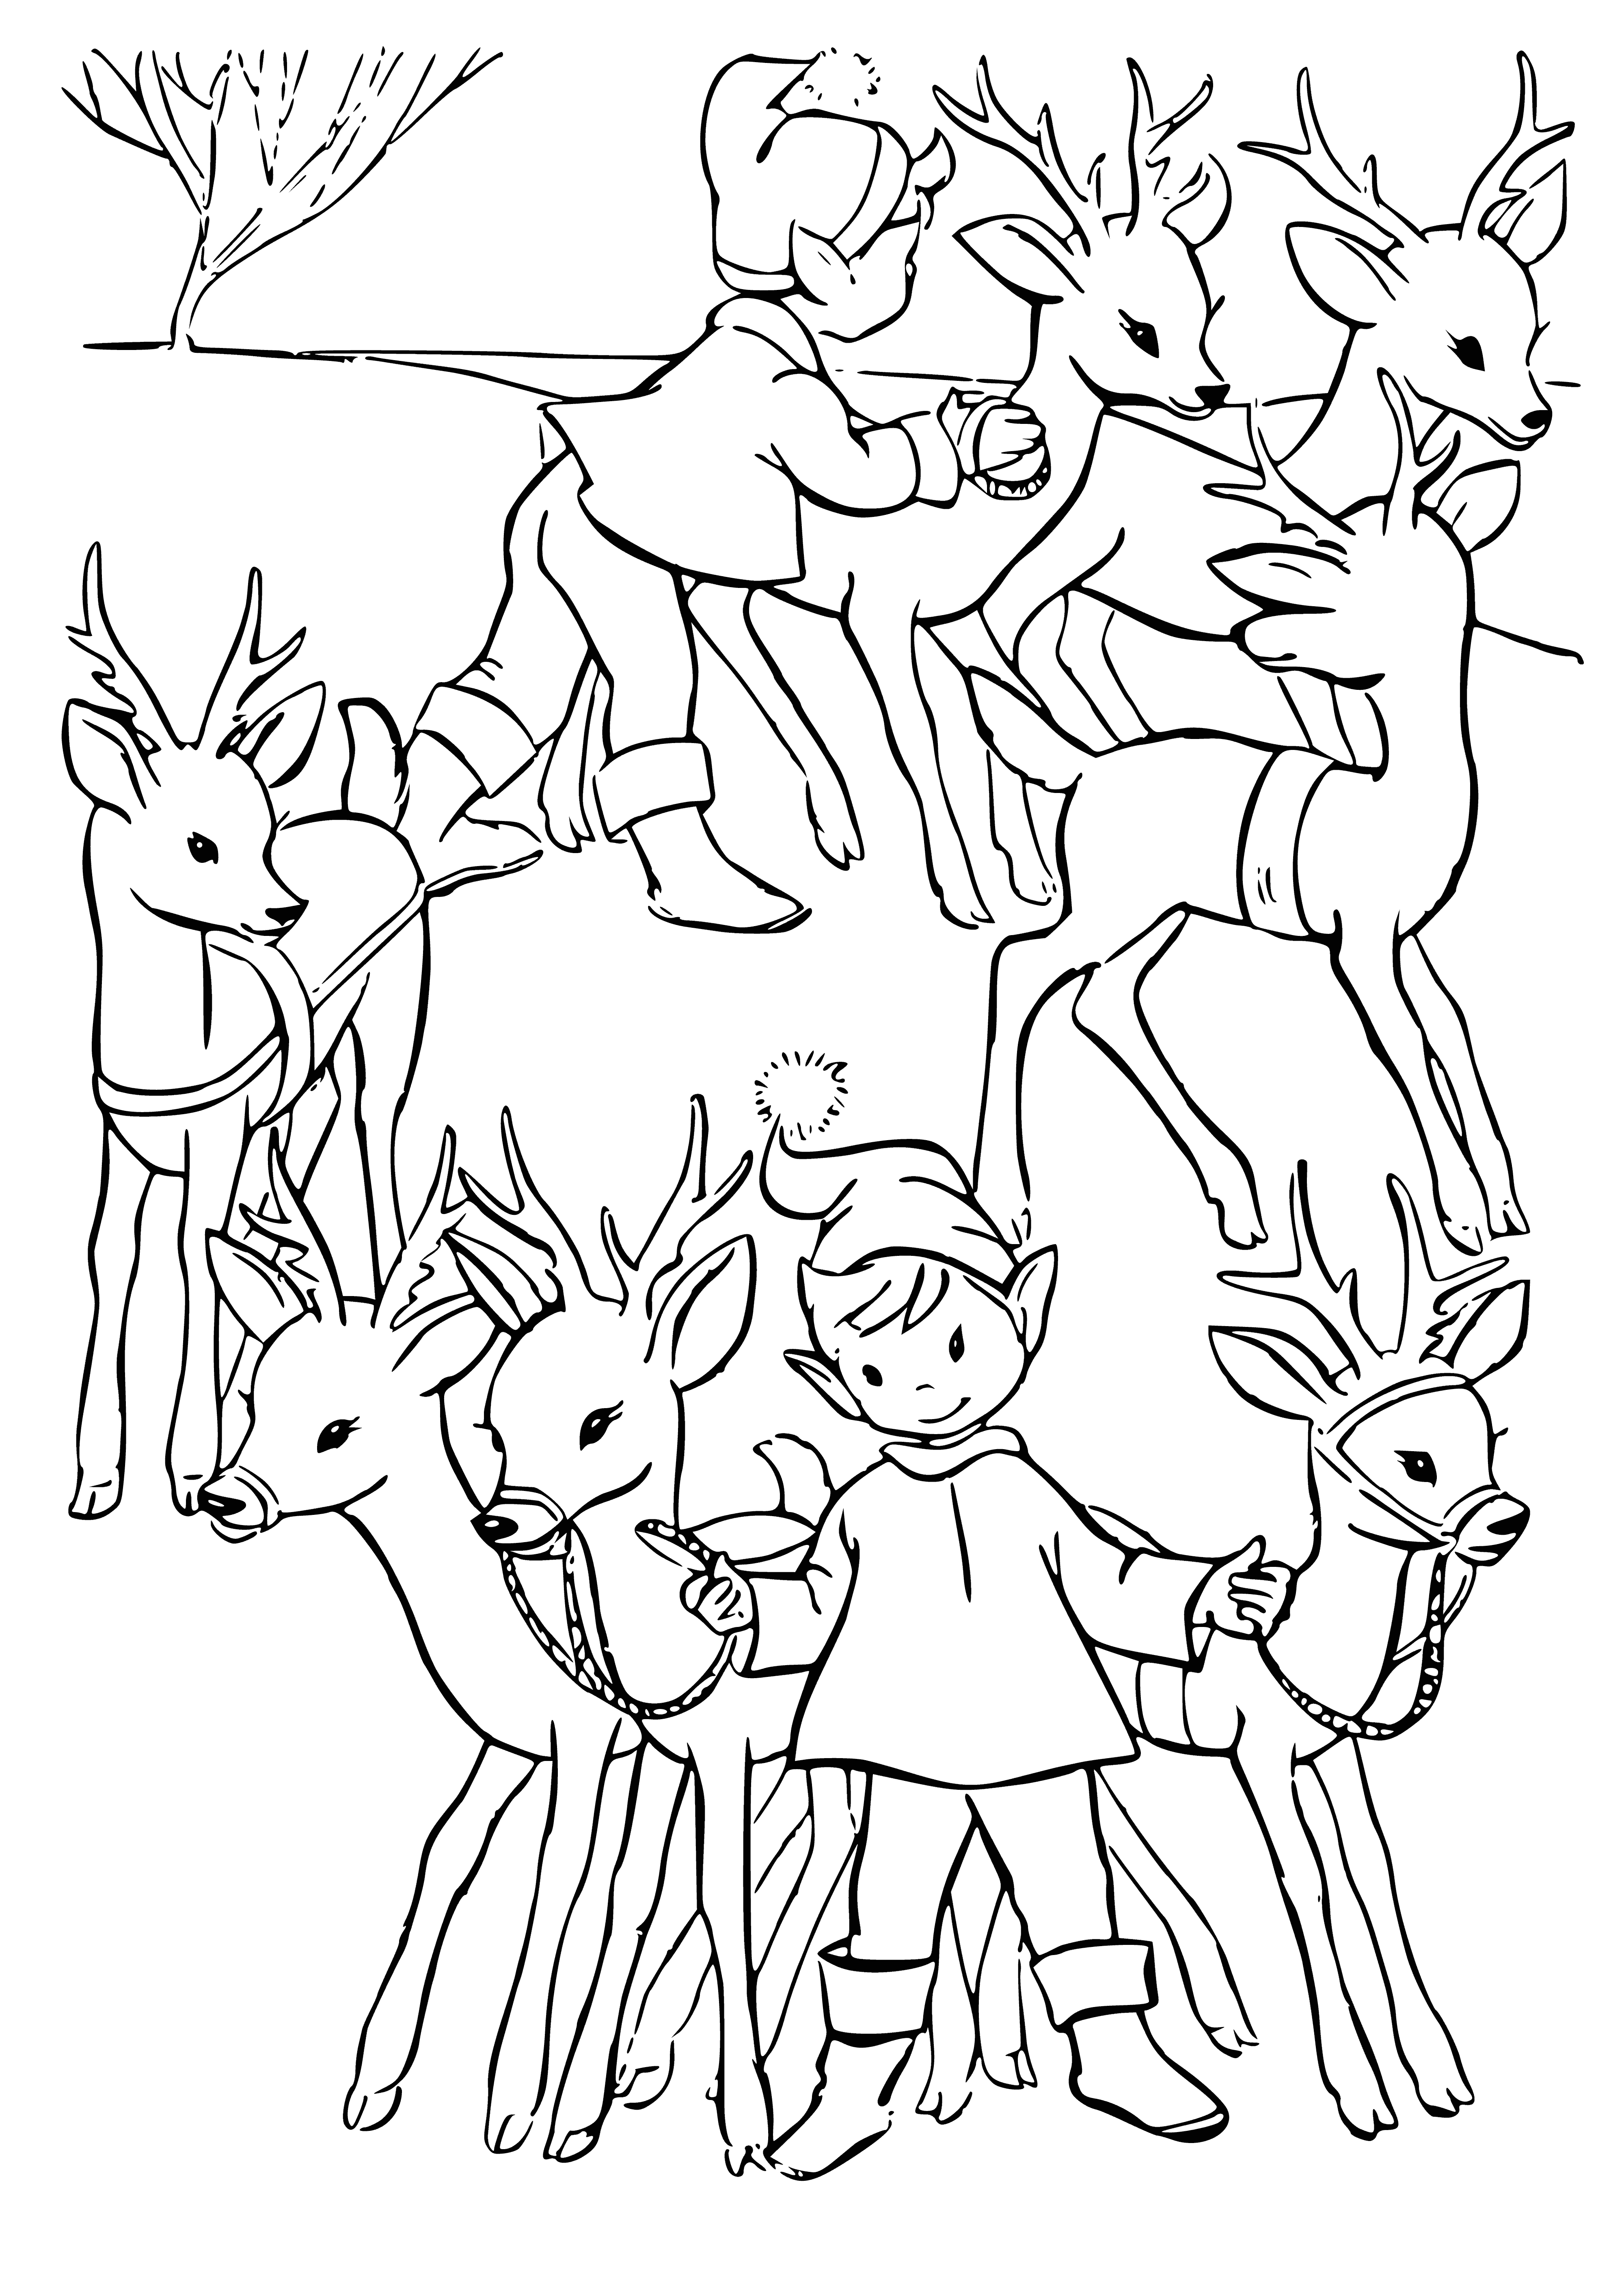 coloring page: Deer wearing Santa outfit, with antlers, scarf & red/white hat, friendly expression looking at camera.